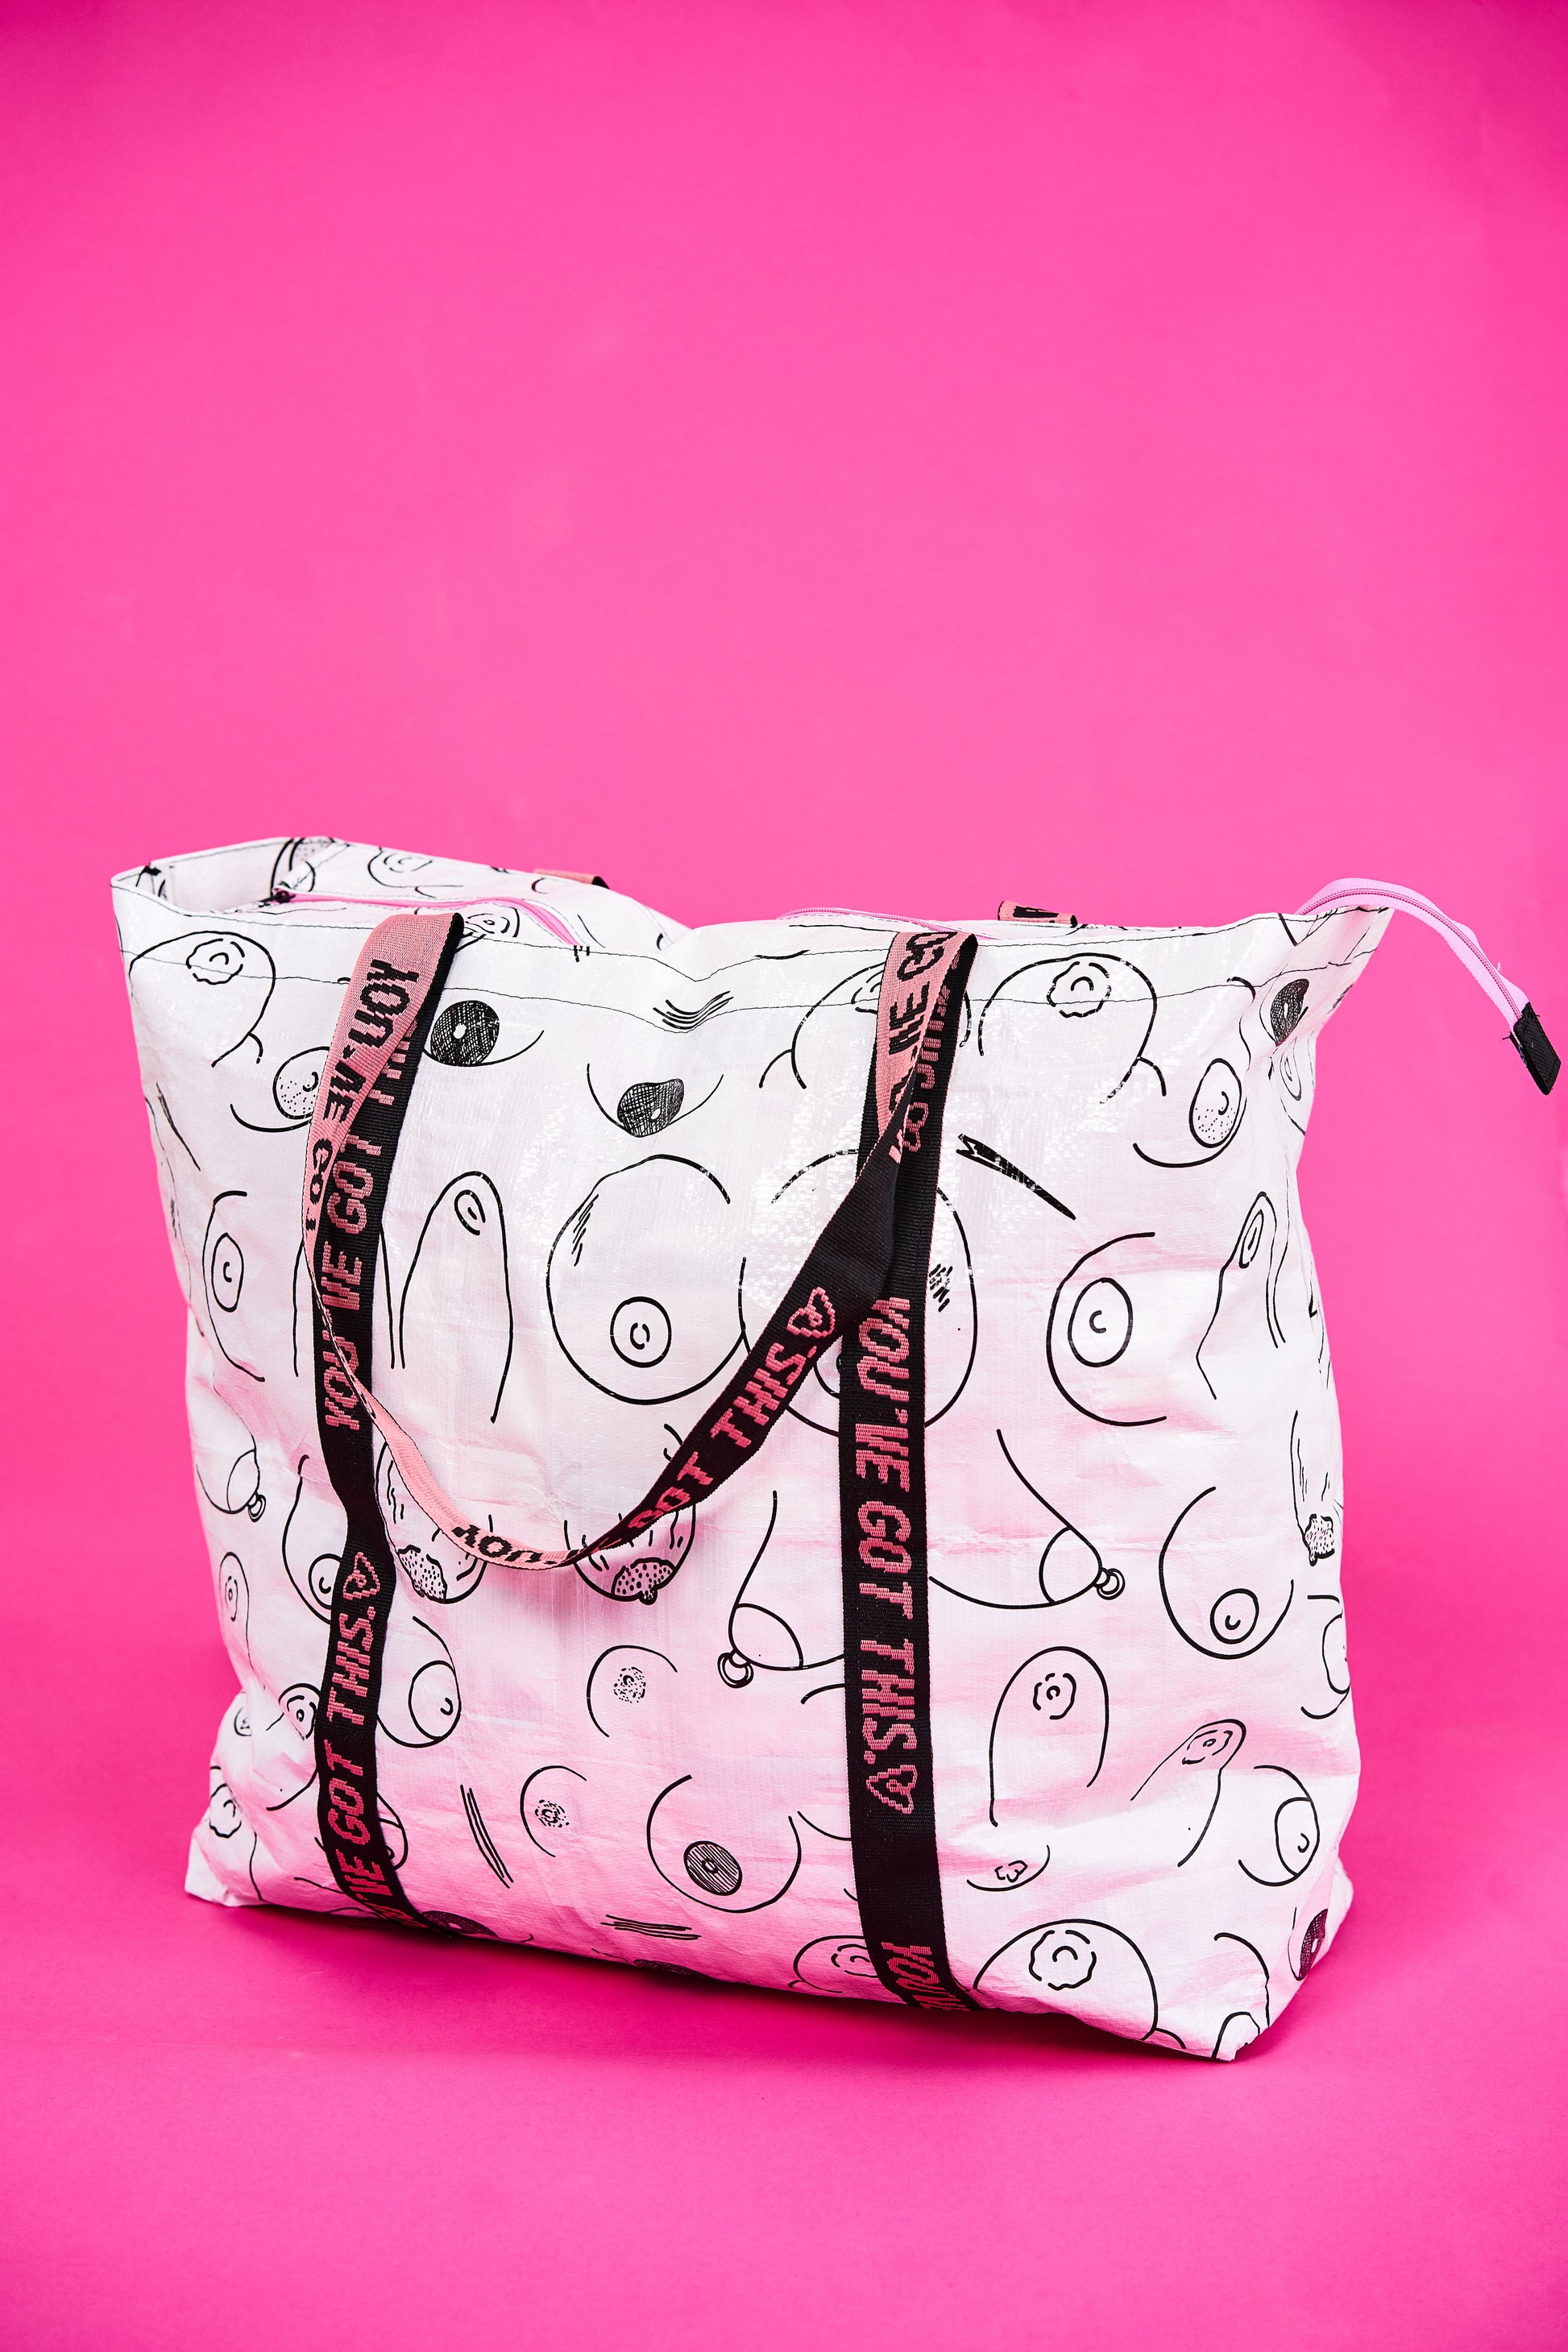 SOLD OUT ONLINE. - VICTORIA SECRET PINK LIMITED QUALITIES COOLER/TOTE BEACH  BAG POOL TOTE